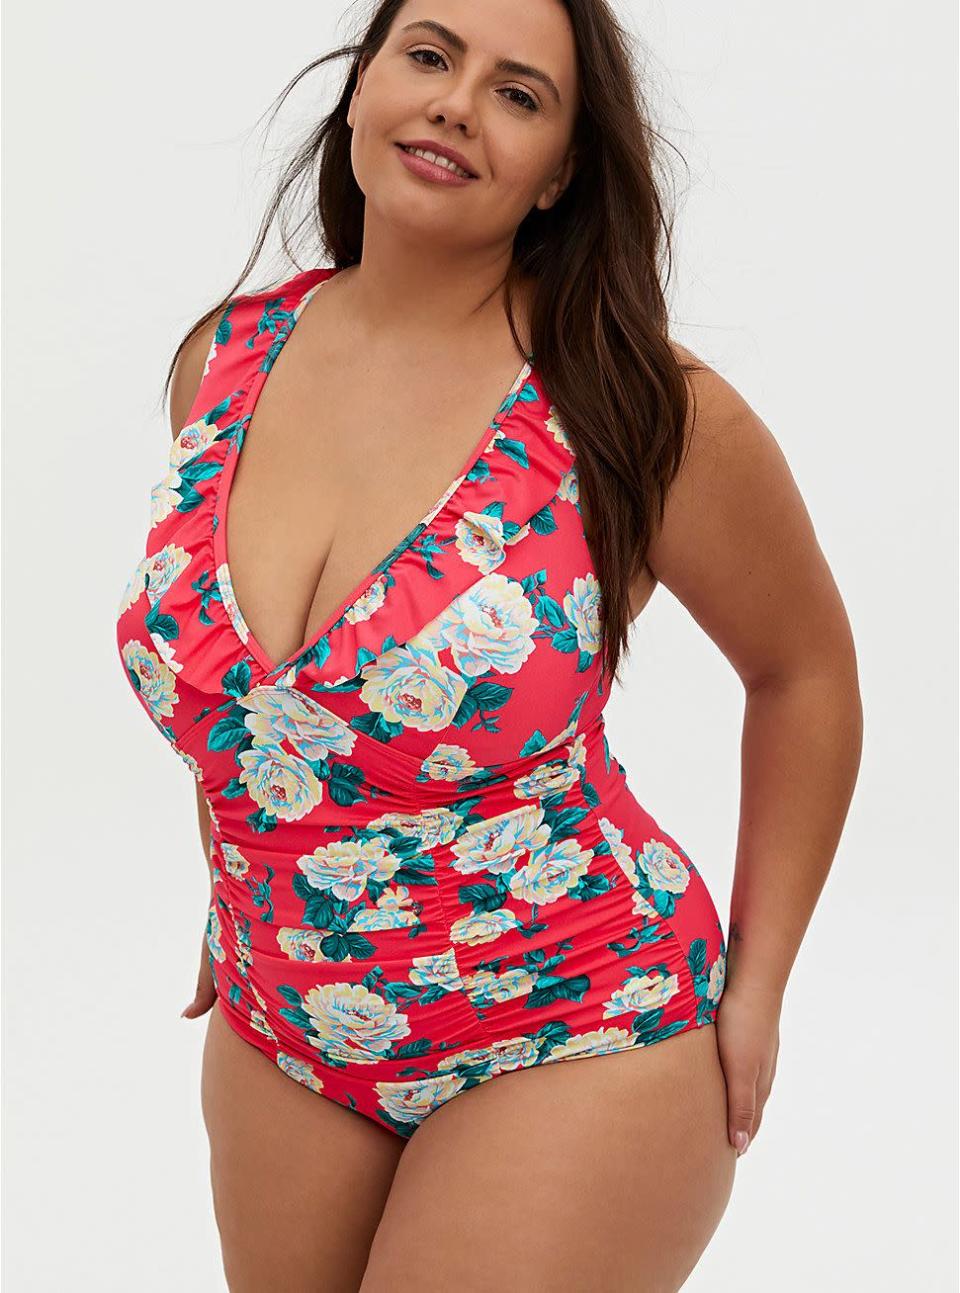 <p><strong>Torrid</strong></p><p>torrid.com</p><p><strong>$64.67</strong></p><p><a href="https://go.redirectingat.com?id=74968X1596630&url=https%3A%2F%2Fwww.torrid.com%2Fproduct%2Fcoral-floral-wireless-ruffle-one-piece-swimsuit%2F12863235.html&sref=https%3A%2F%2Fwww.prevention.com%2Fbeauty%2Fstyle%2Fg32314827%2Fbest-plus-size-bathing-suits%2F" rel="nofollow noopener" target="_blank" data-ylk="slk:Shop Now" class="link ">Shop Now</a></p><p>There’s nothing like a bright floral print to welcome warm weather. This one-piece features a ruffled trim paired with a plunging V-neck for a balance of cute and sexy. The suit comes with adjustable, multiway straps and wireless cups to help you feel supported, while the ruched front offers a flattering fit. As a bonus, <strong>it even has UPF 30+ sun protection.</strong></p>